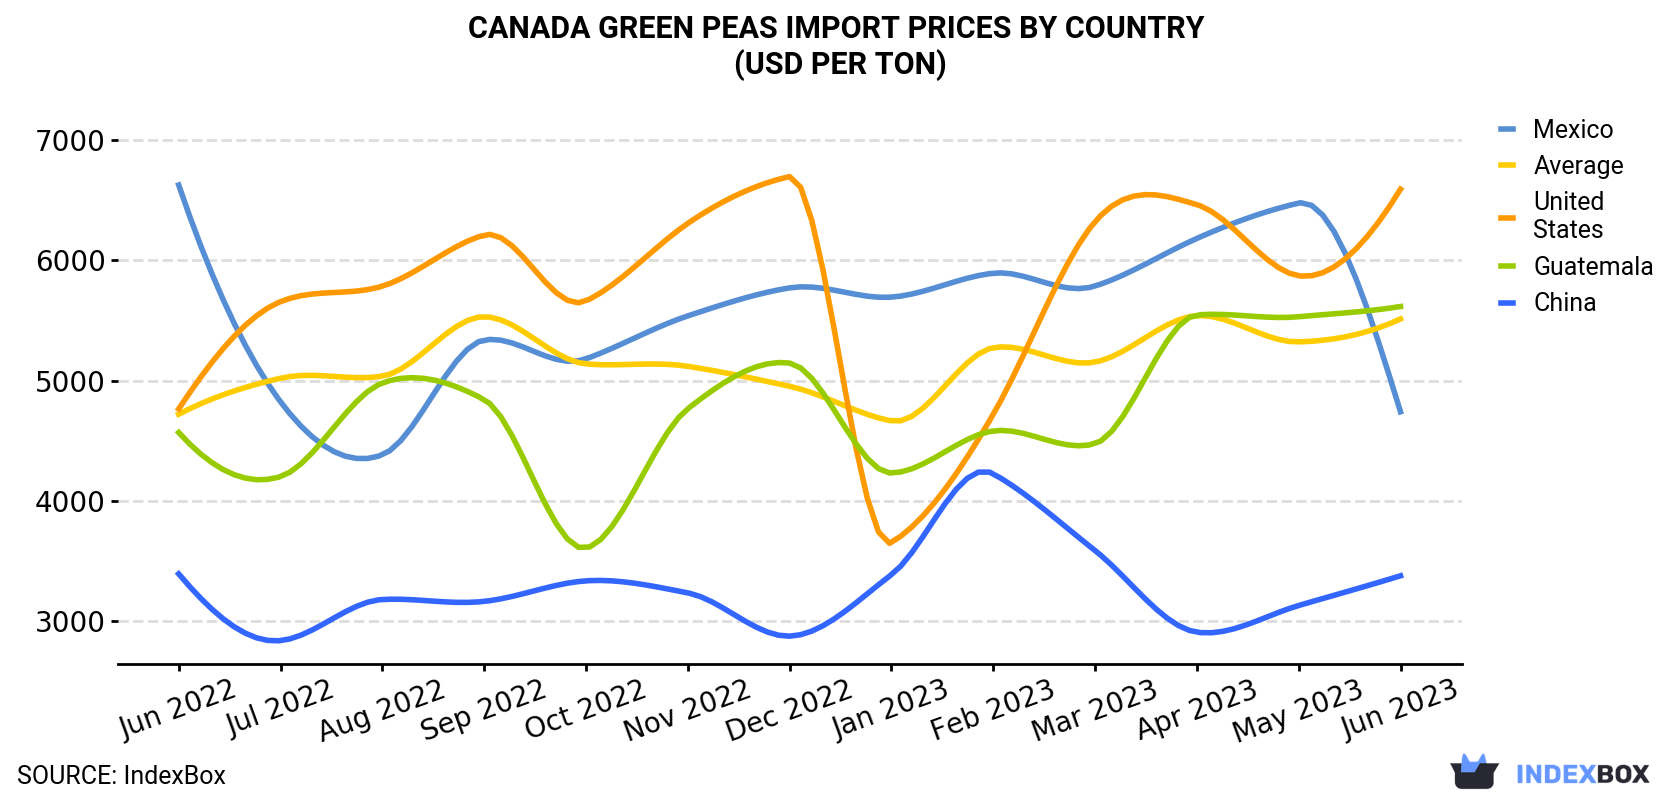 Canada Green Peas Import Prices By Country (USD Per Ton)